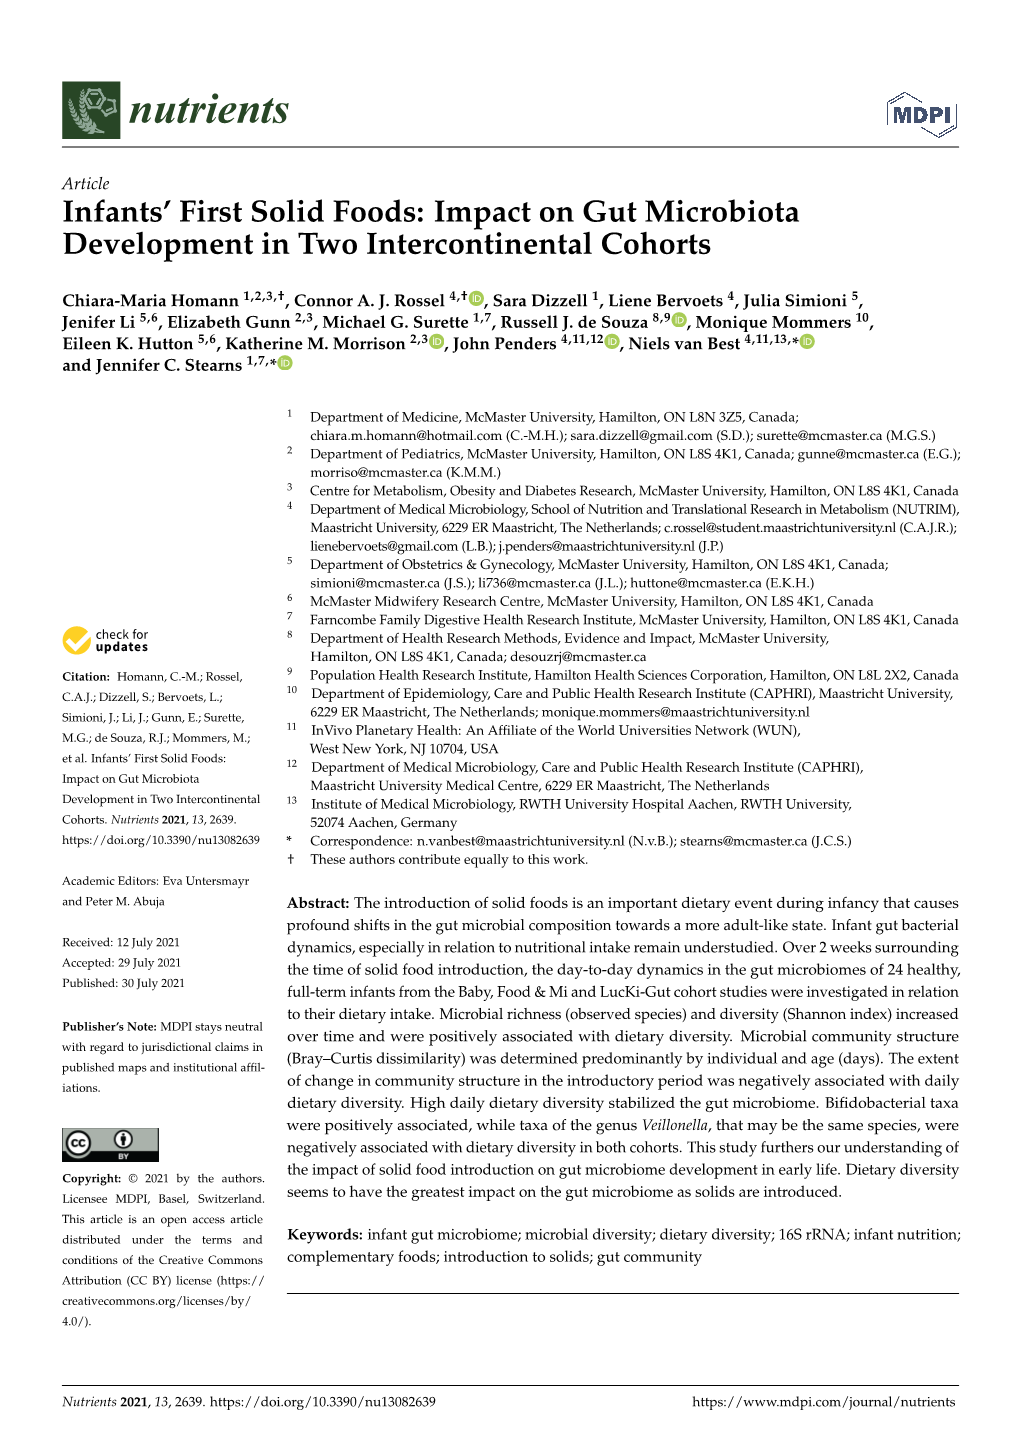 Infants' First Solid Foods: Impact on Gut Microbiota Development in Two